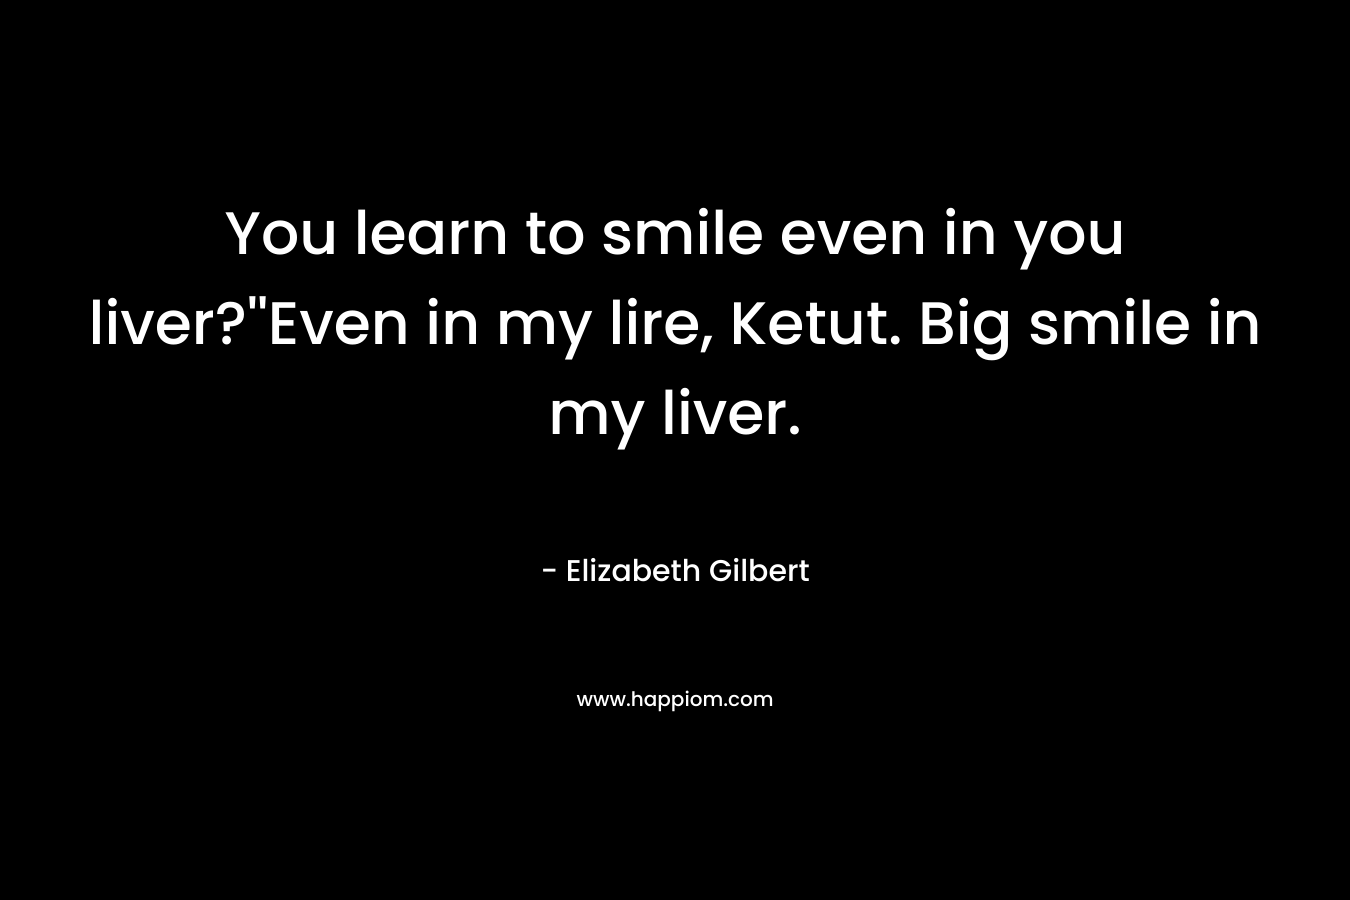 You learn to smile even in you liver?”Even in my lire, Ketut. Big smile in my liver. – Elizabeth Gilbert